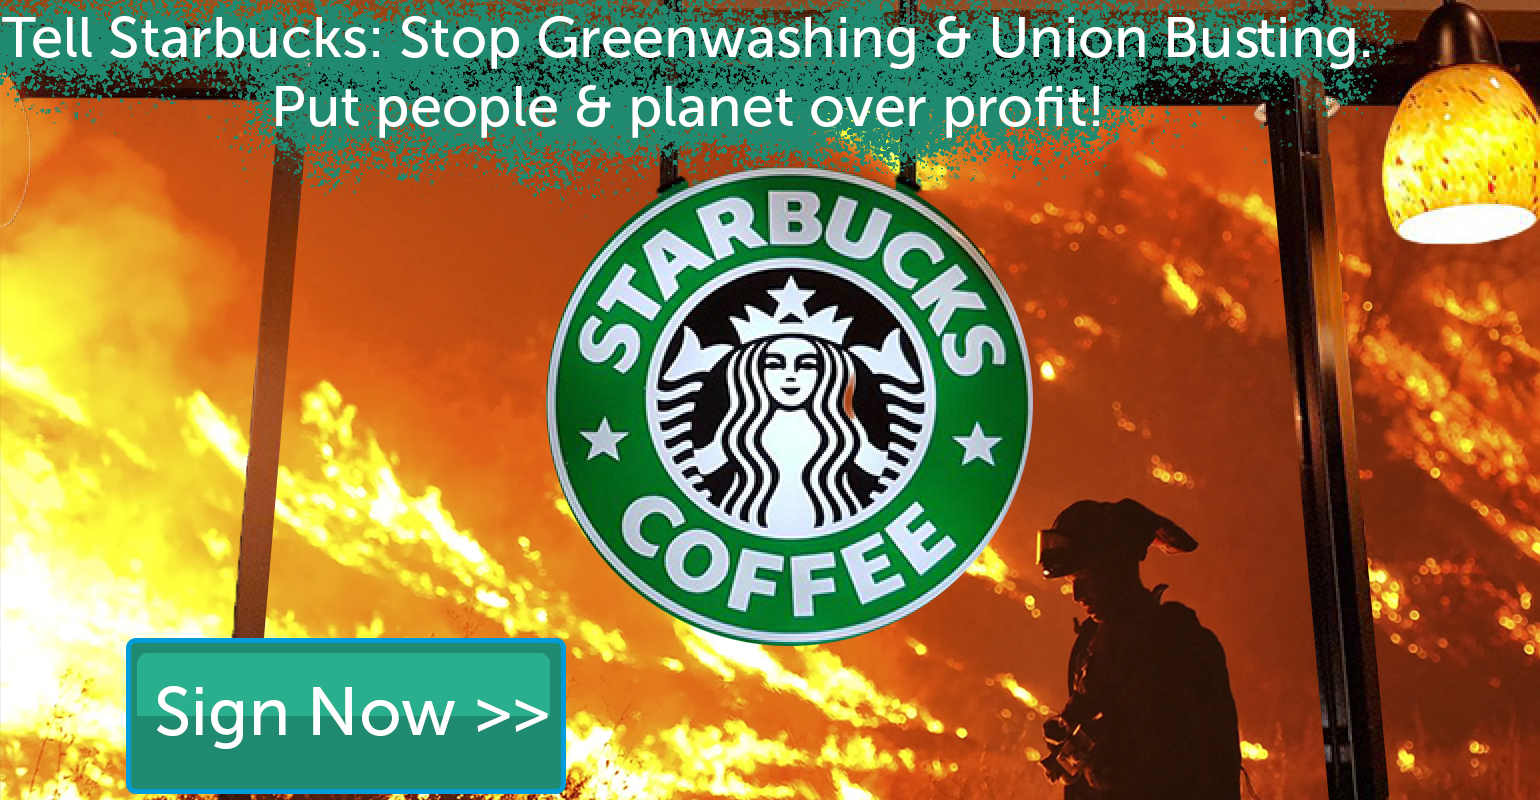 Tell Starbucks: Stop Greenwashing and Union Busting. 